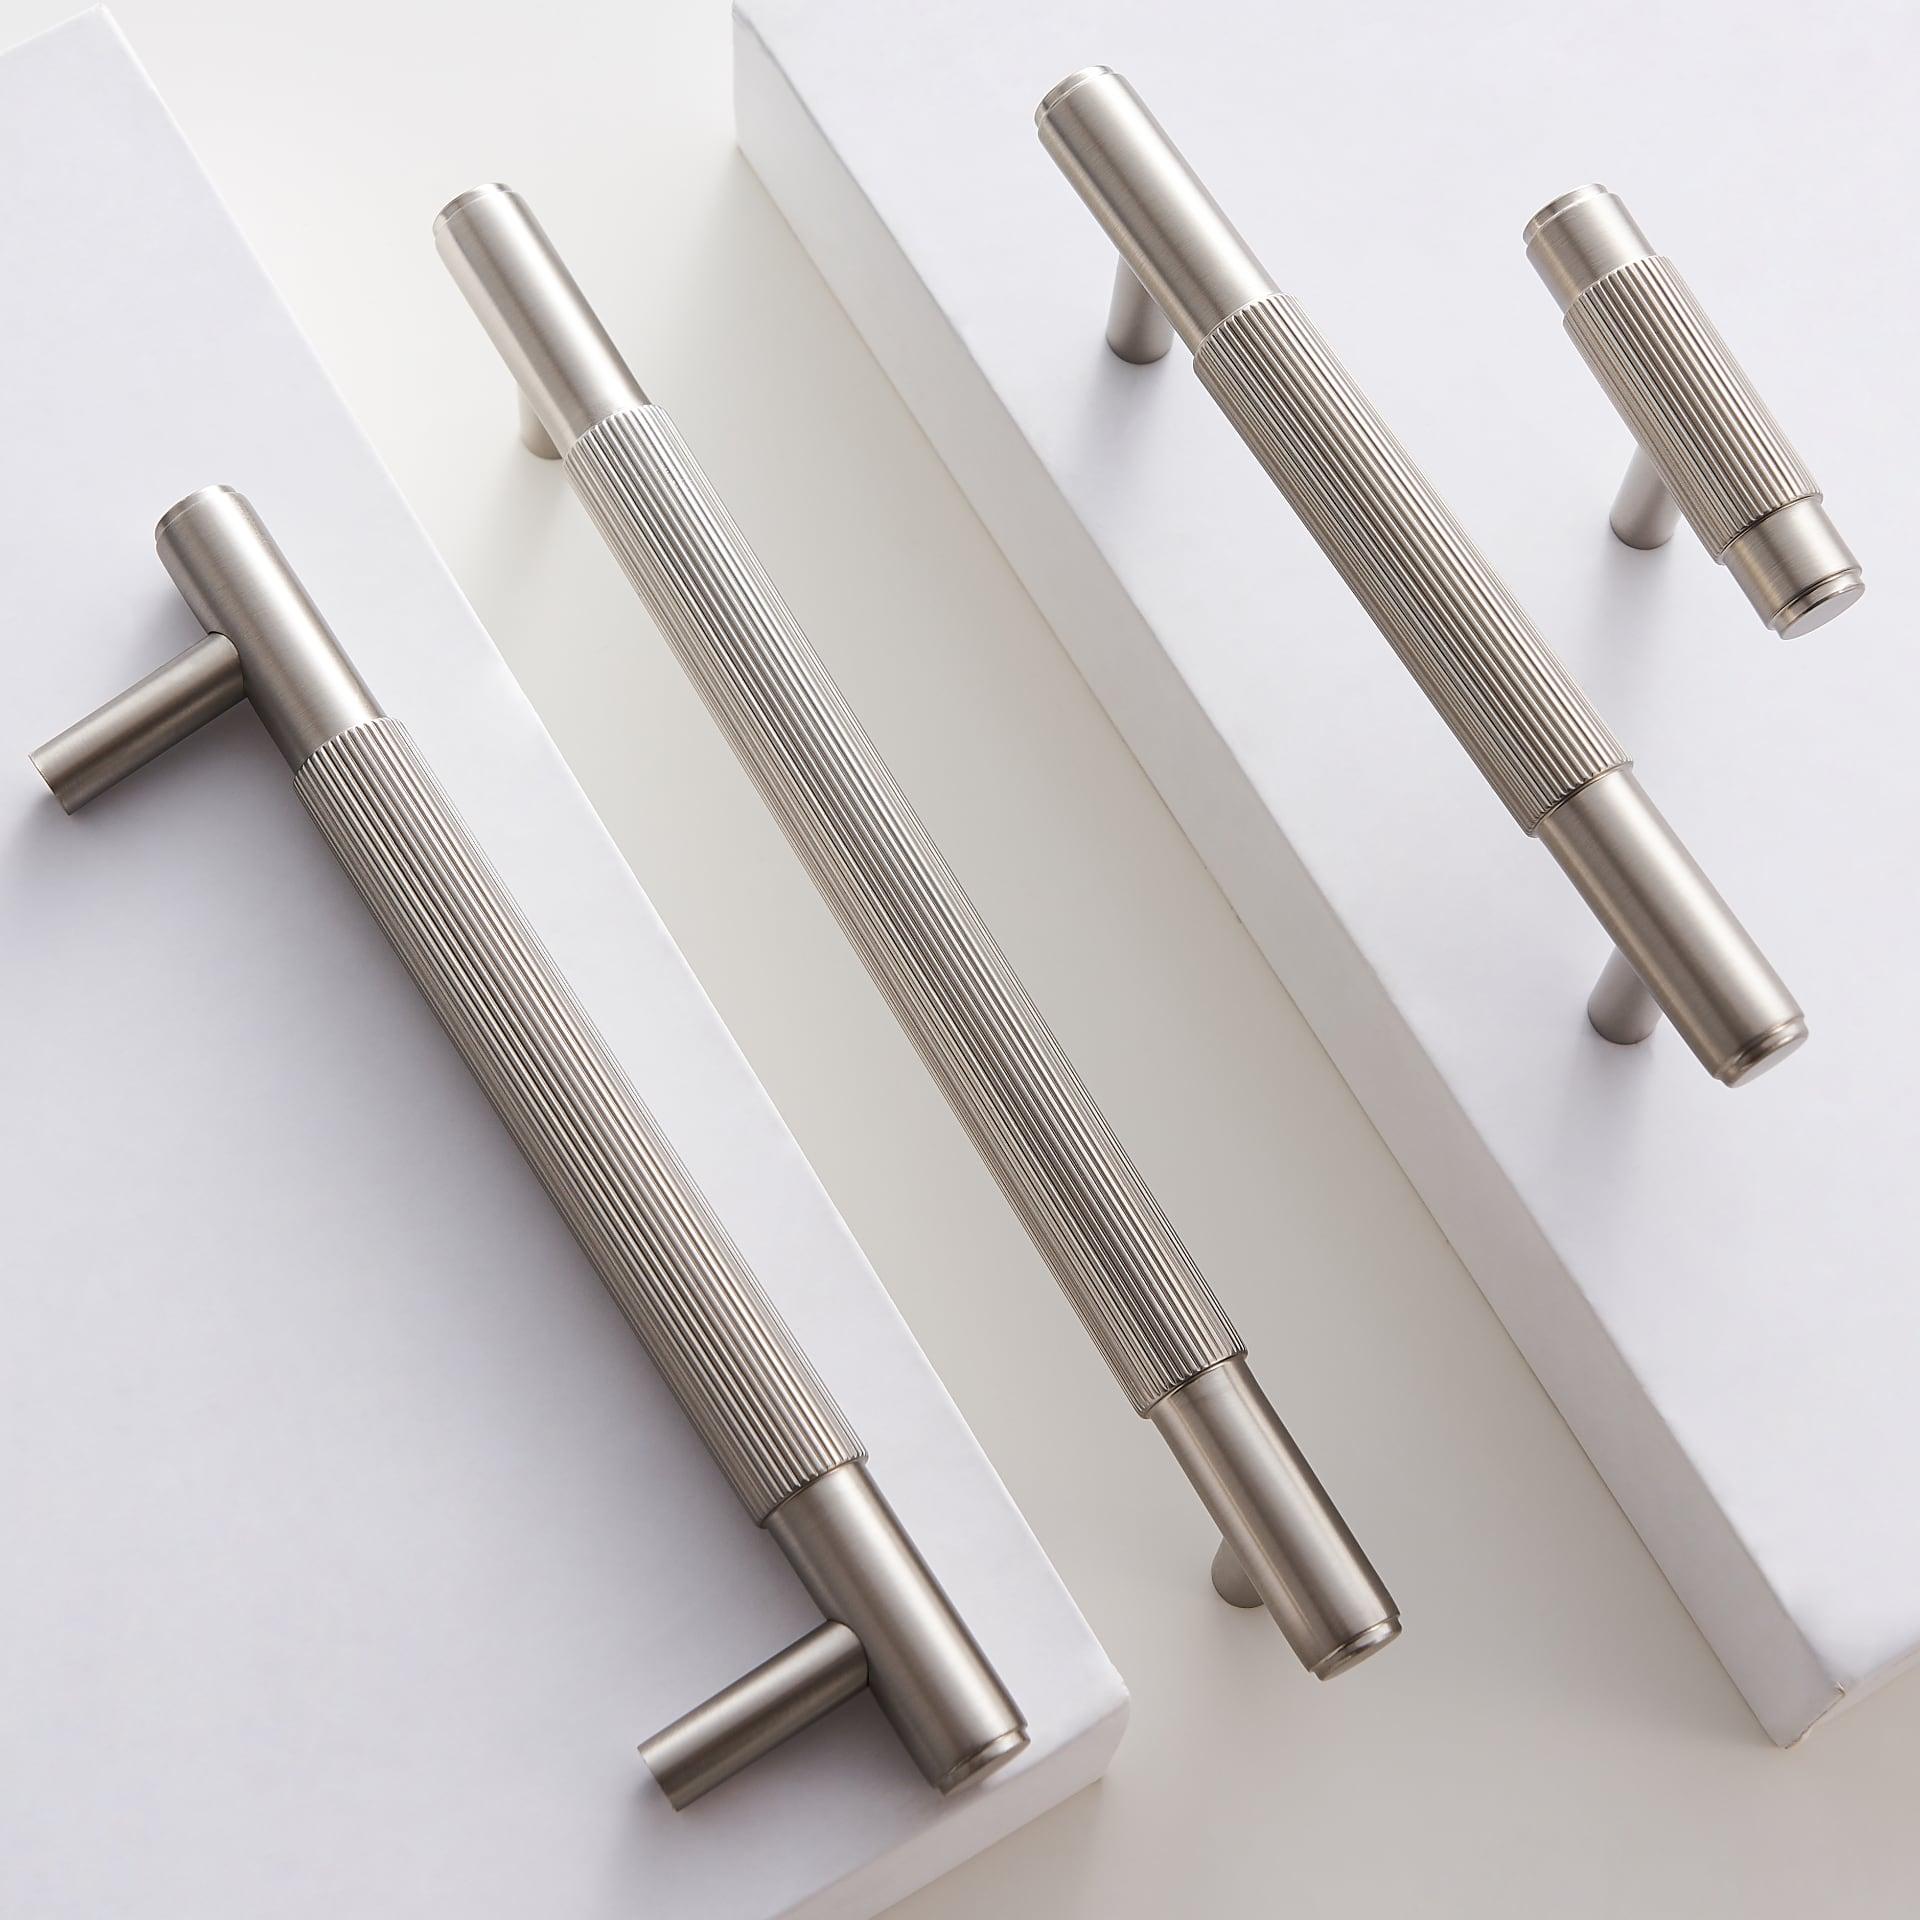 MARBELLA / SOLID BRASS HANDLES - Handle Shop Couture 